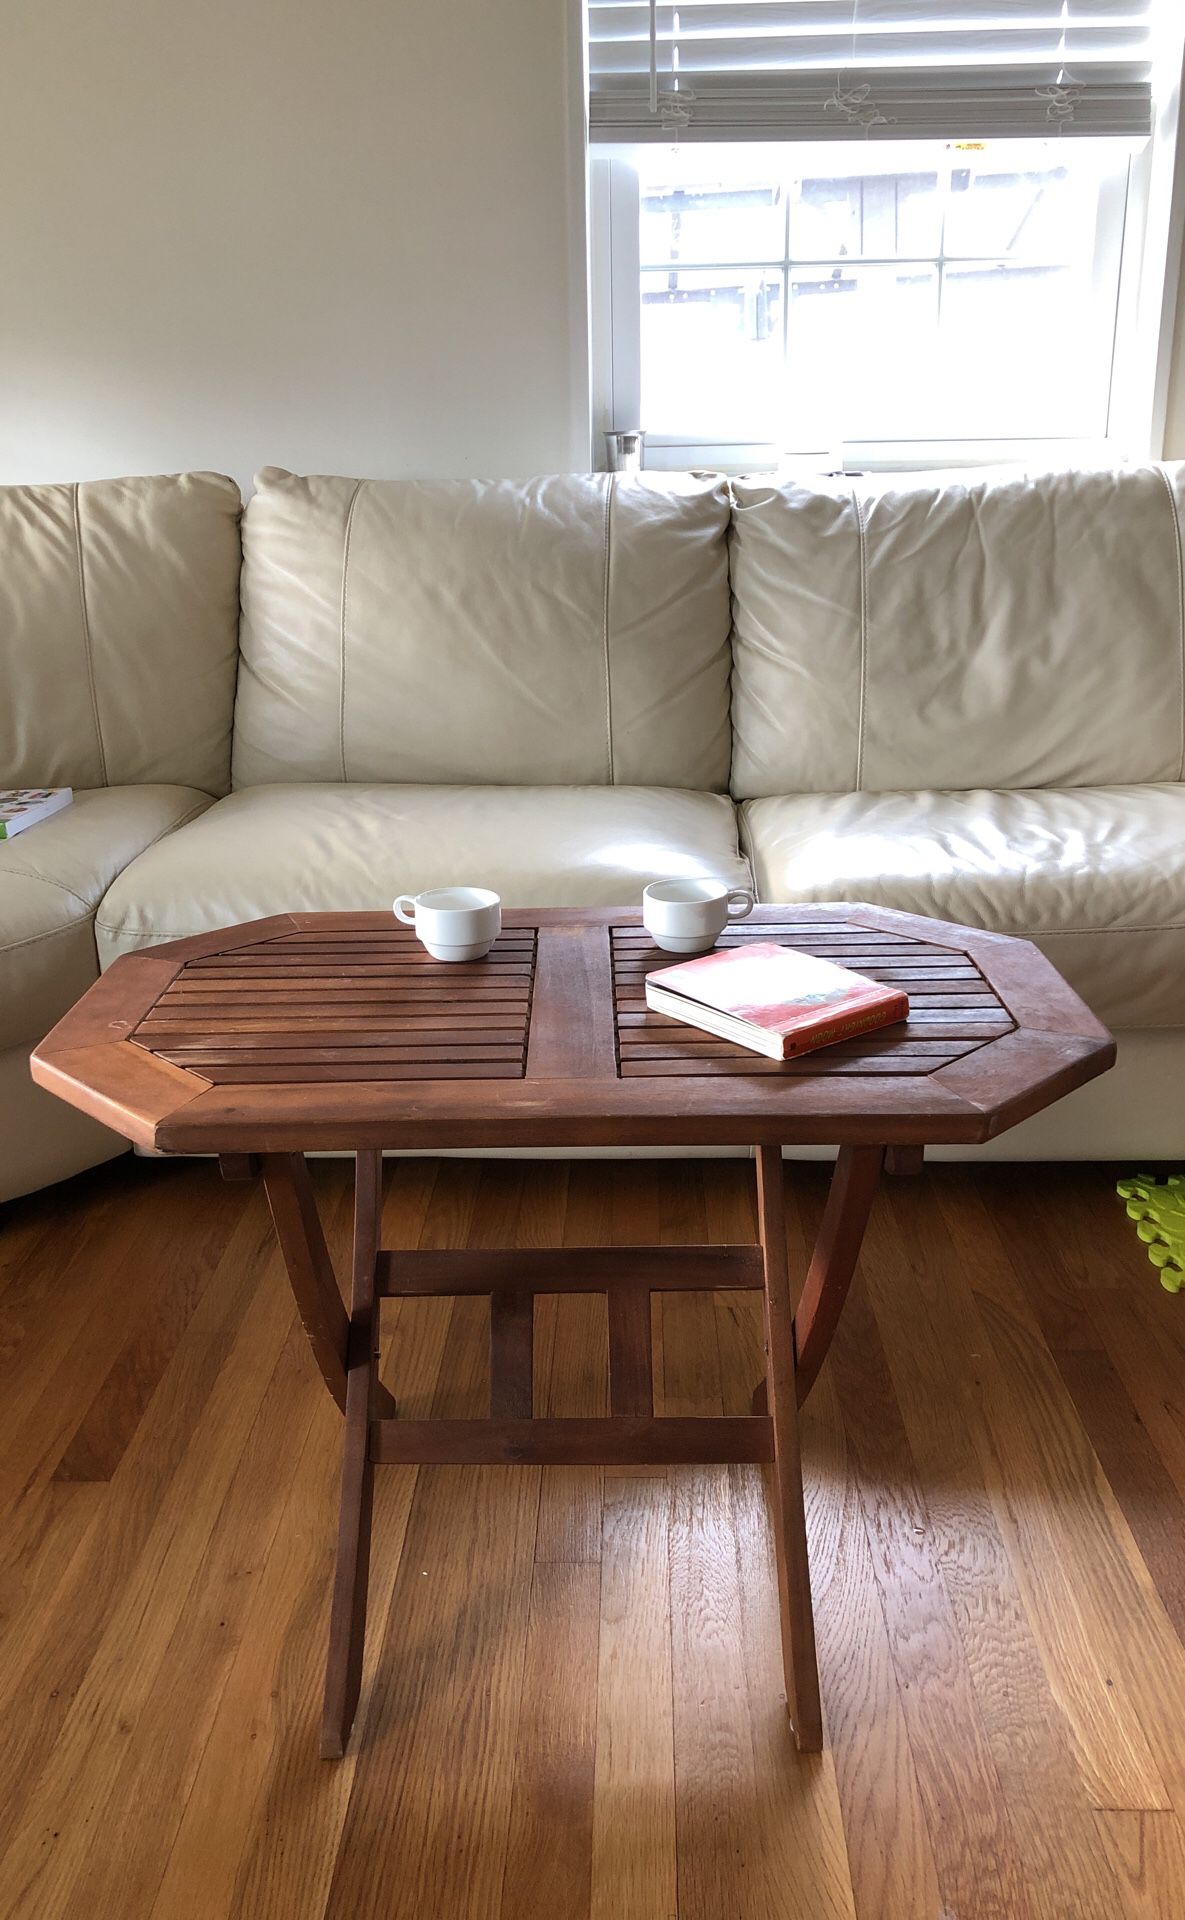 Wooden coffee table / patio table